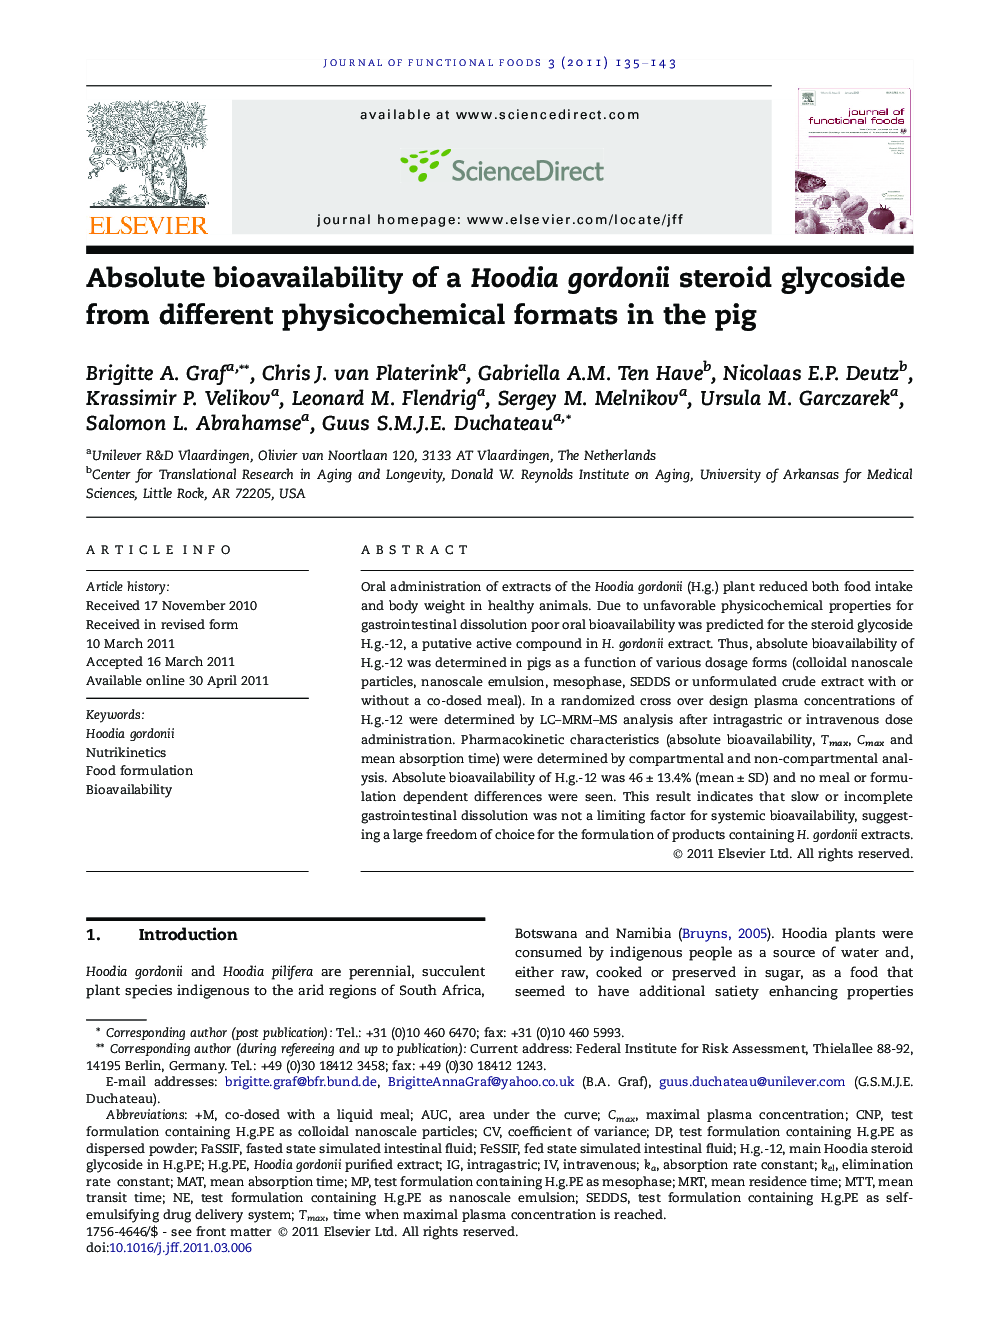 Absolute bioavailability of a Hoodia gordonii steroid glycoside from different physicochemical formats in the pig